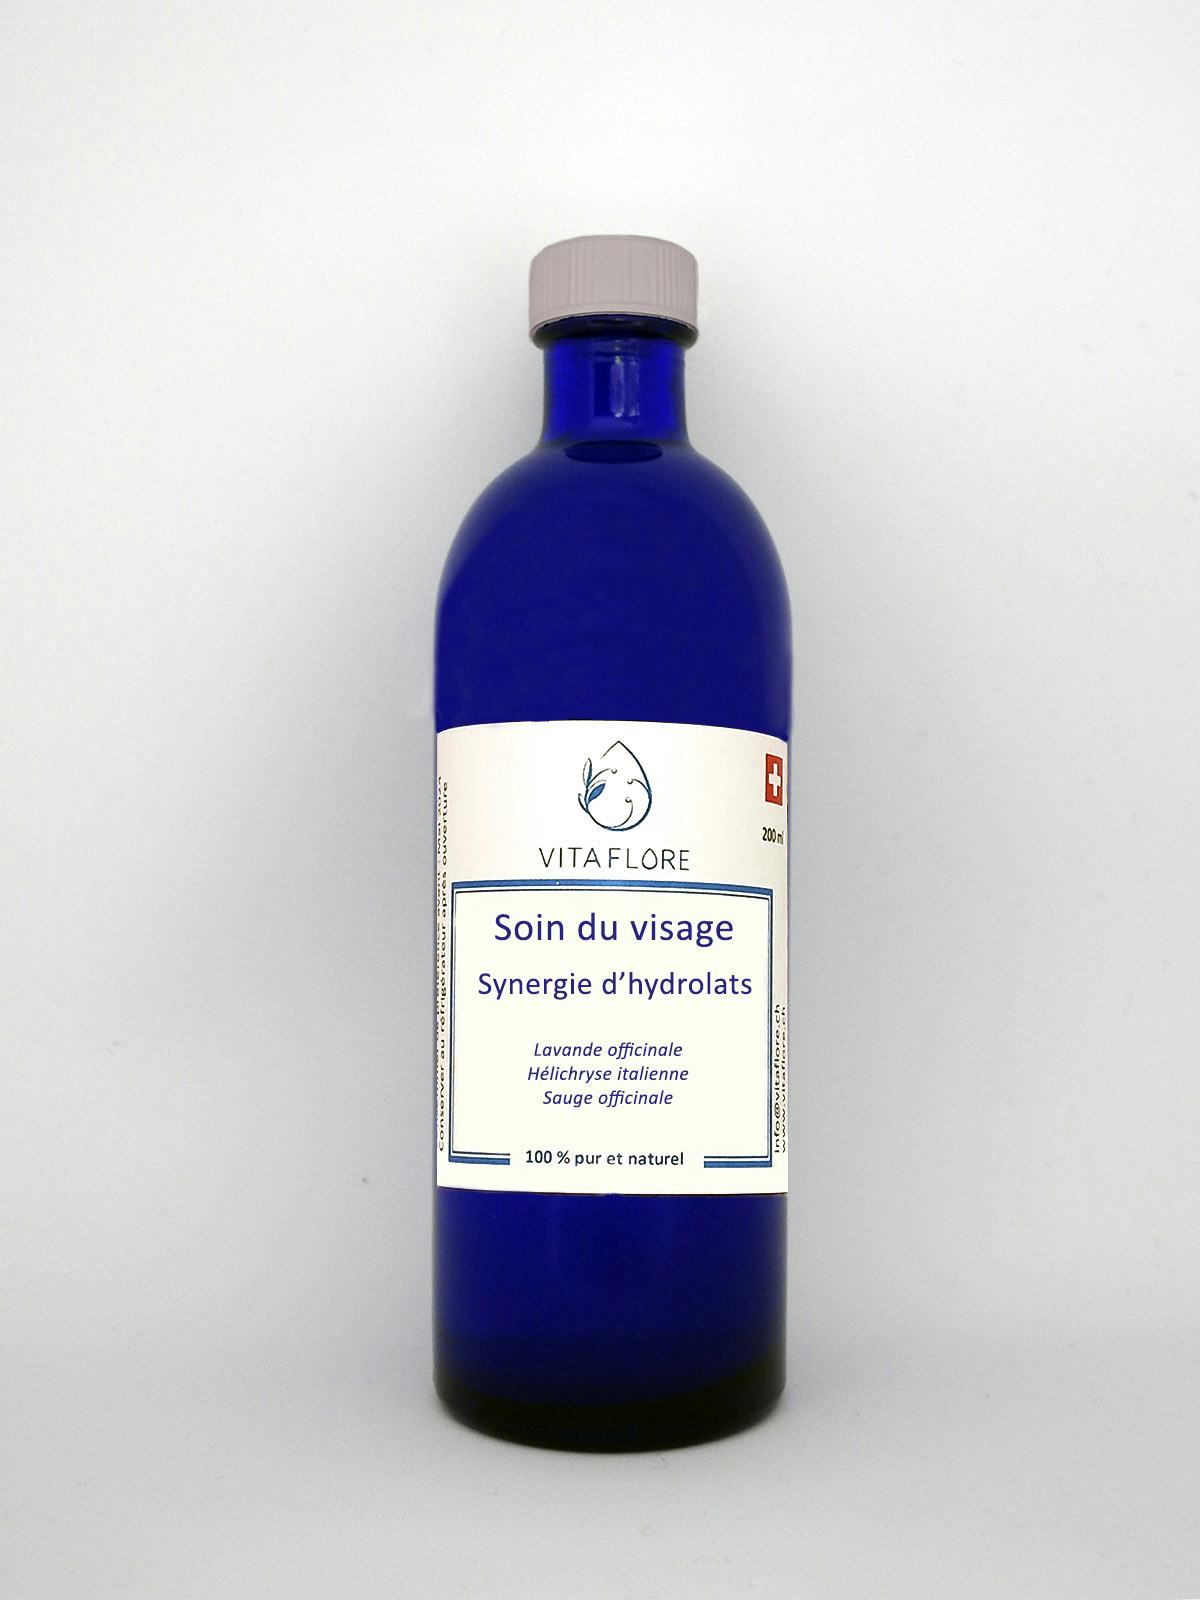 Synergy of hydrosols – Facial care, artisanal product for direct sale in Switzerland